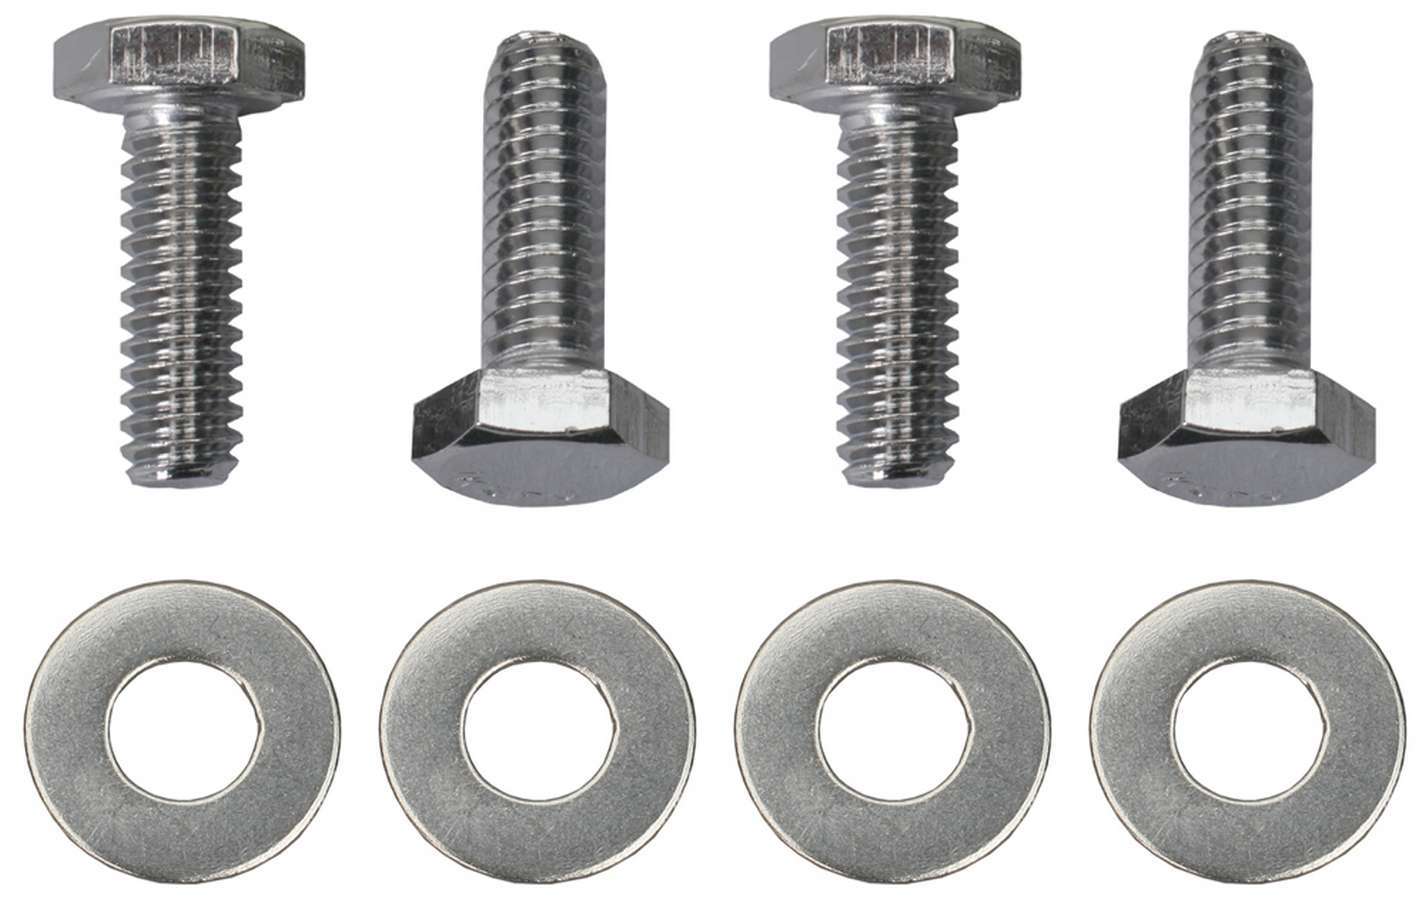 Trans Dapt 9781 Valve Cover Fastener, Bolt, 1/4-20 in Thread, 0.750 in Long, Hex Head, Washers Included, Steel, Chrome, Set of 4